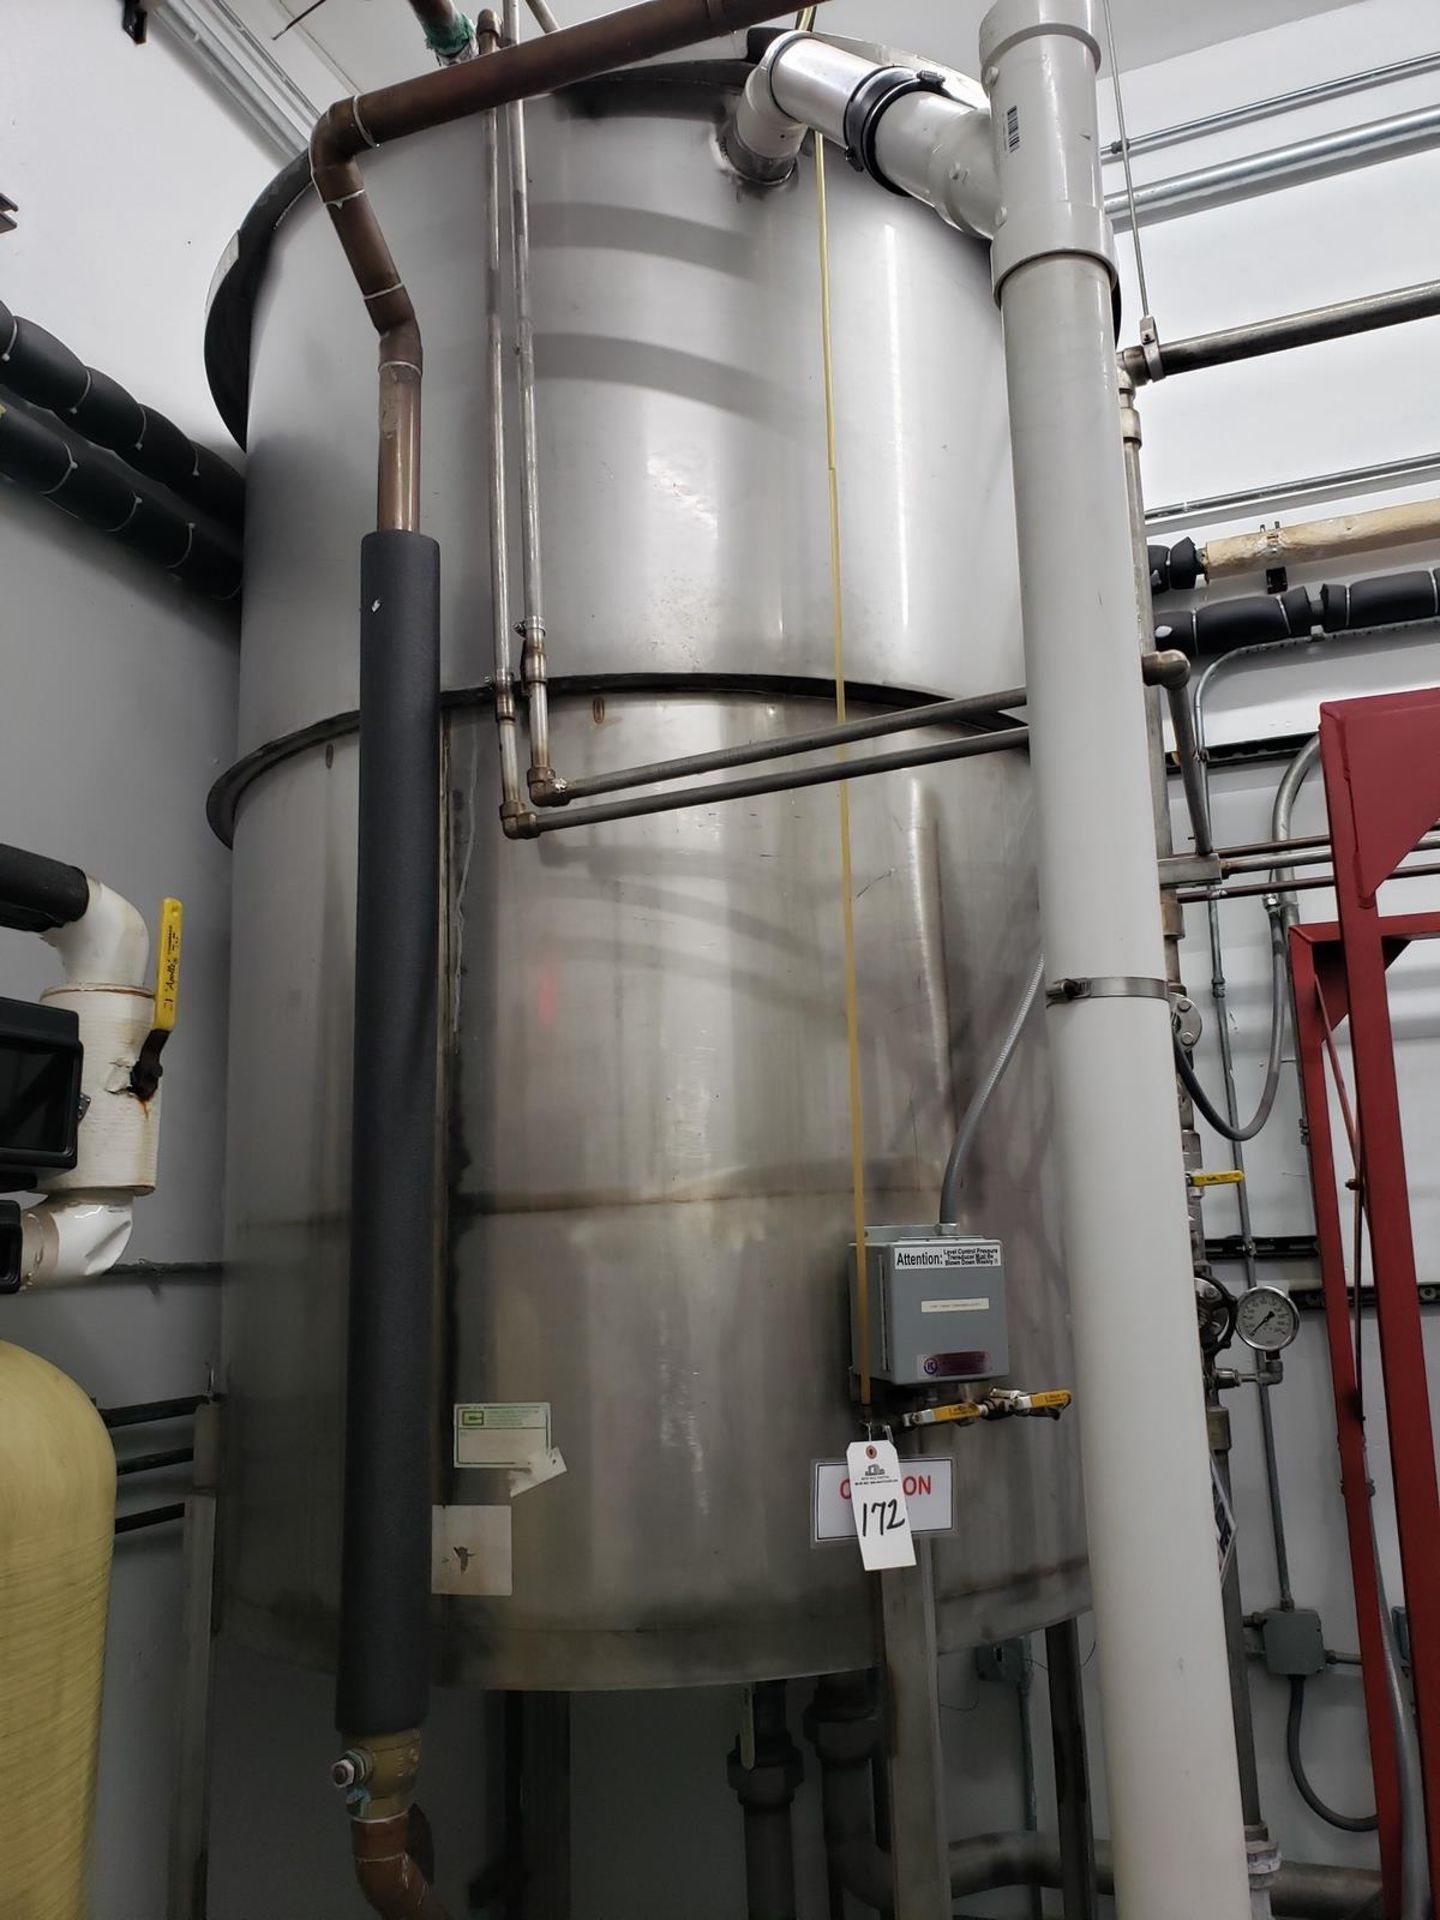 Stainless Steel Hot Water Holding Tank, W/ Transfer Pump | Rig Fee: $1800